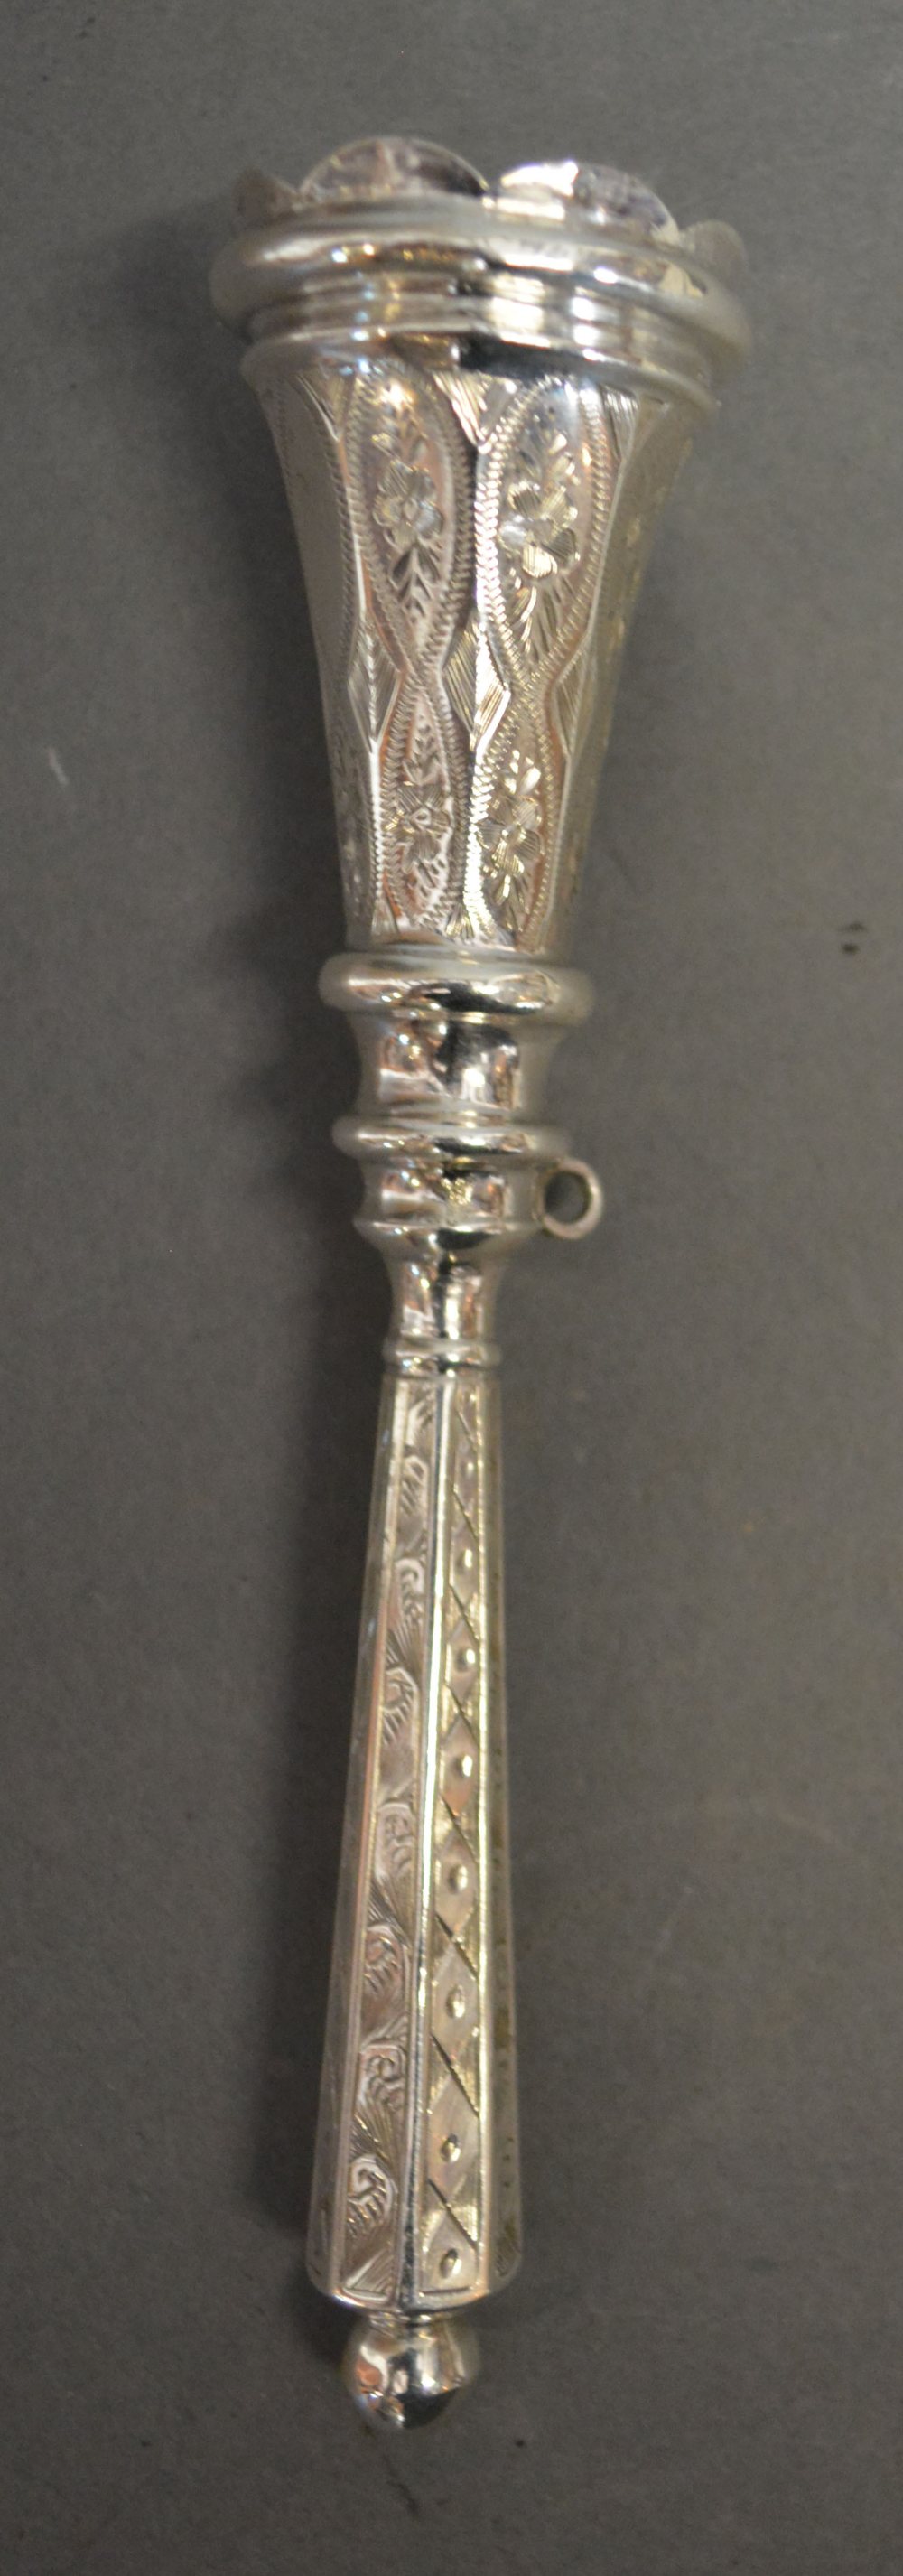 A White Metal Posy Holder with engraved